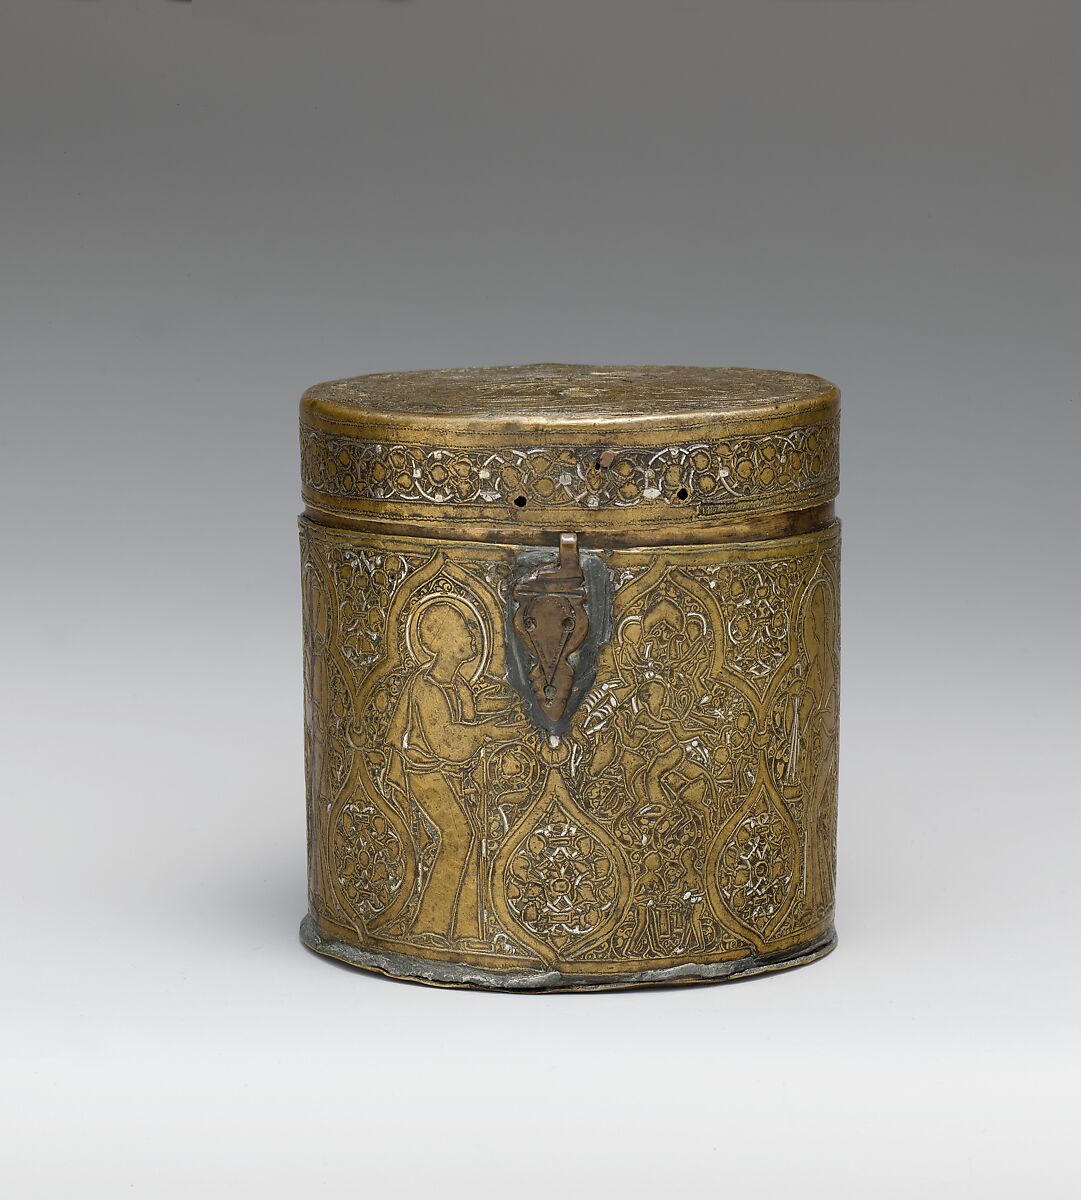 Pyxis Depicting Standing Saints or Ecclesiastics and the Entry into Jerusalem with Christ Riding a Donkey, Brass; hammered, engraved, inlaid with silver 